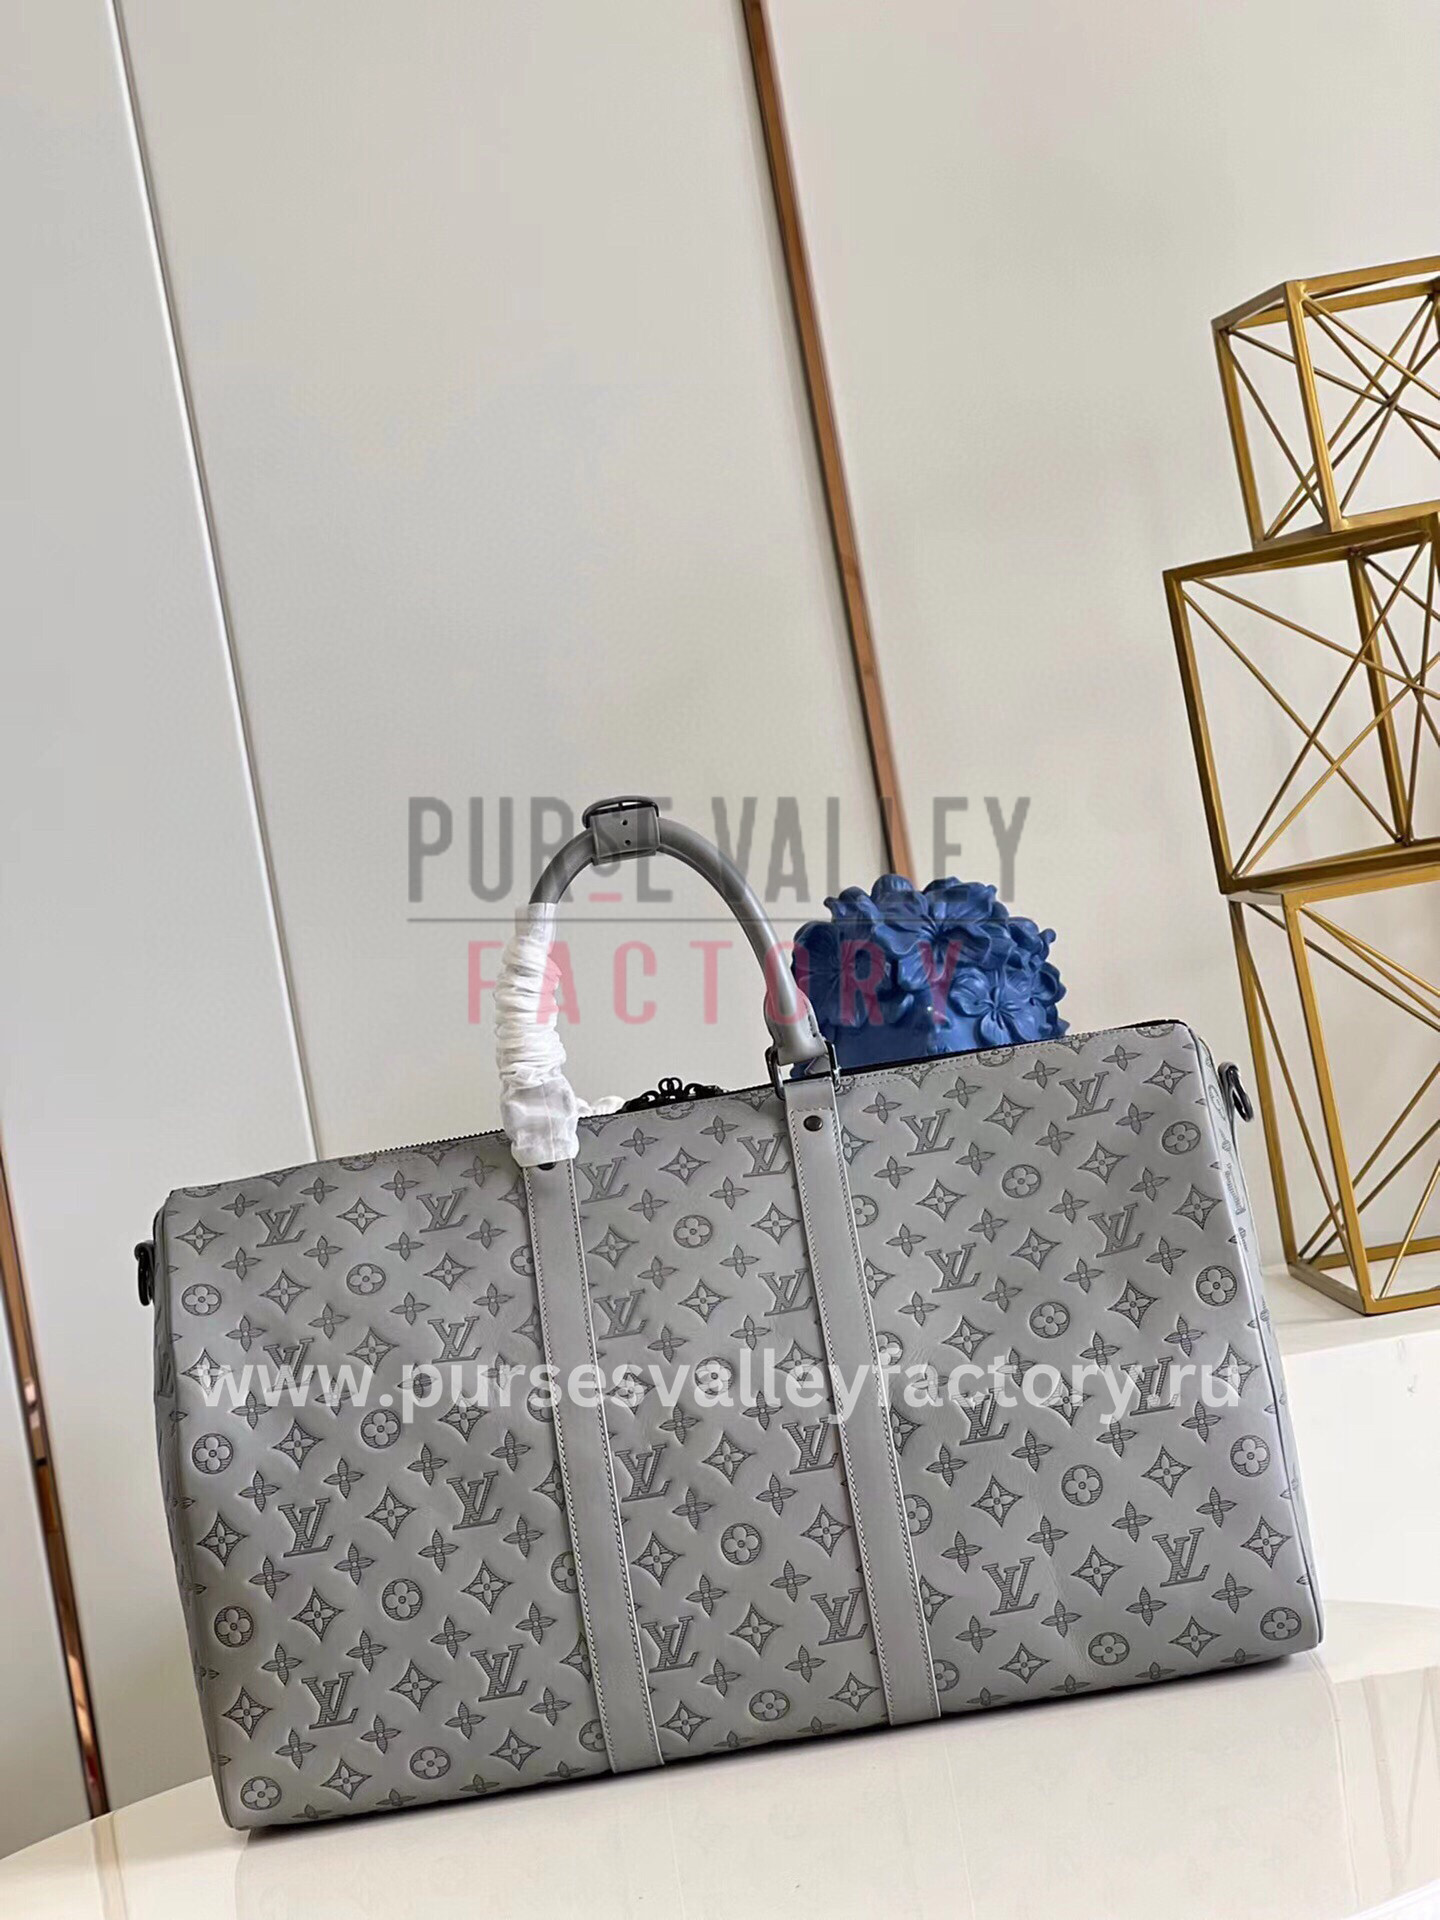 Louis Vuitton Keepall 50 Granite in Embossed Cowhide Leather with